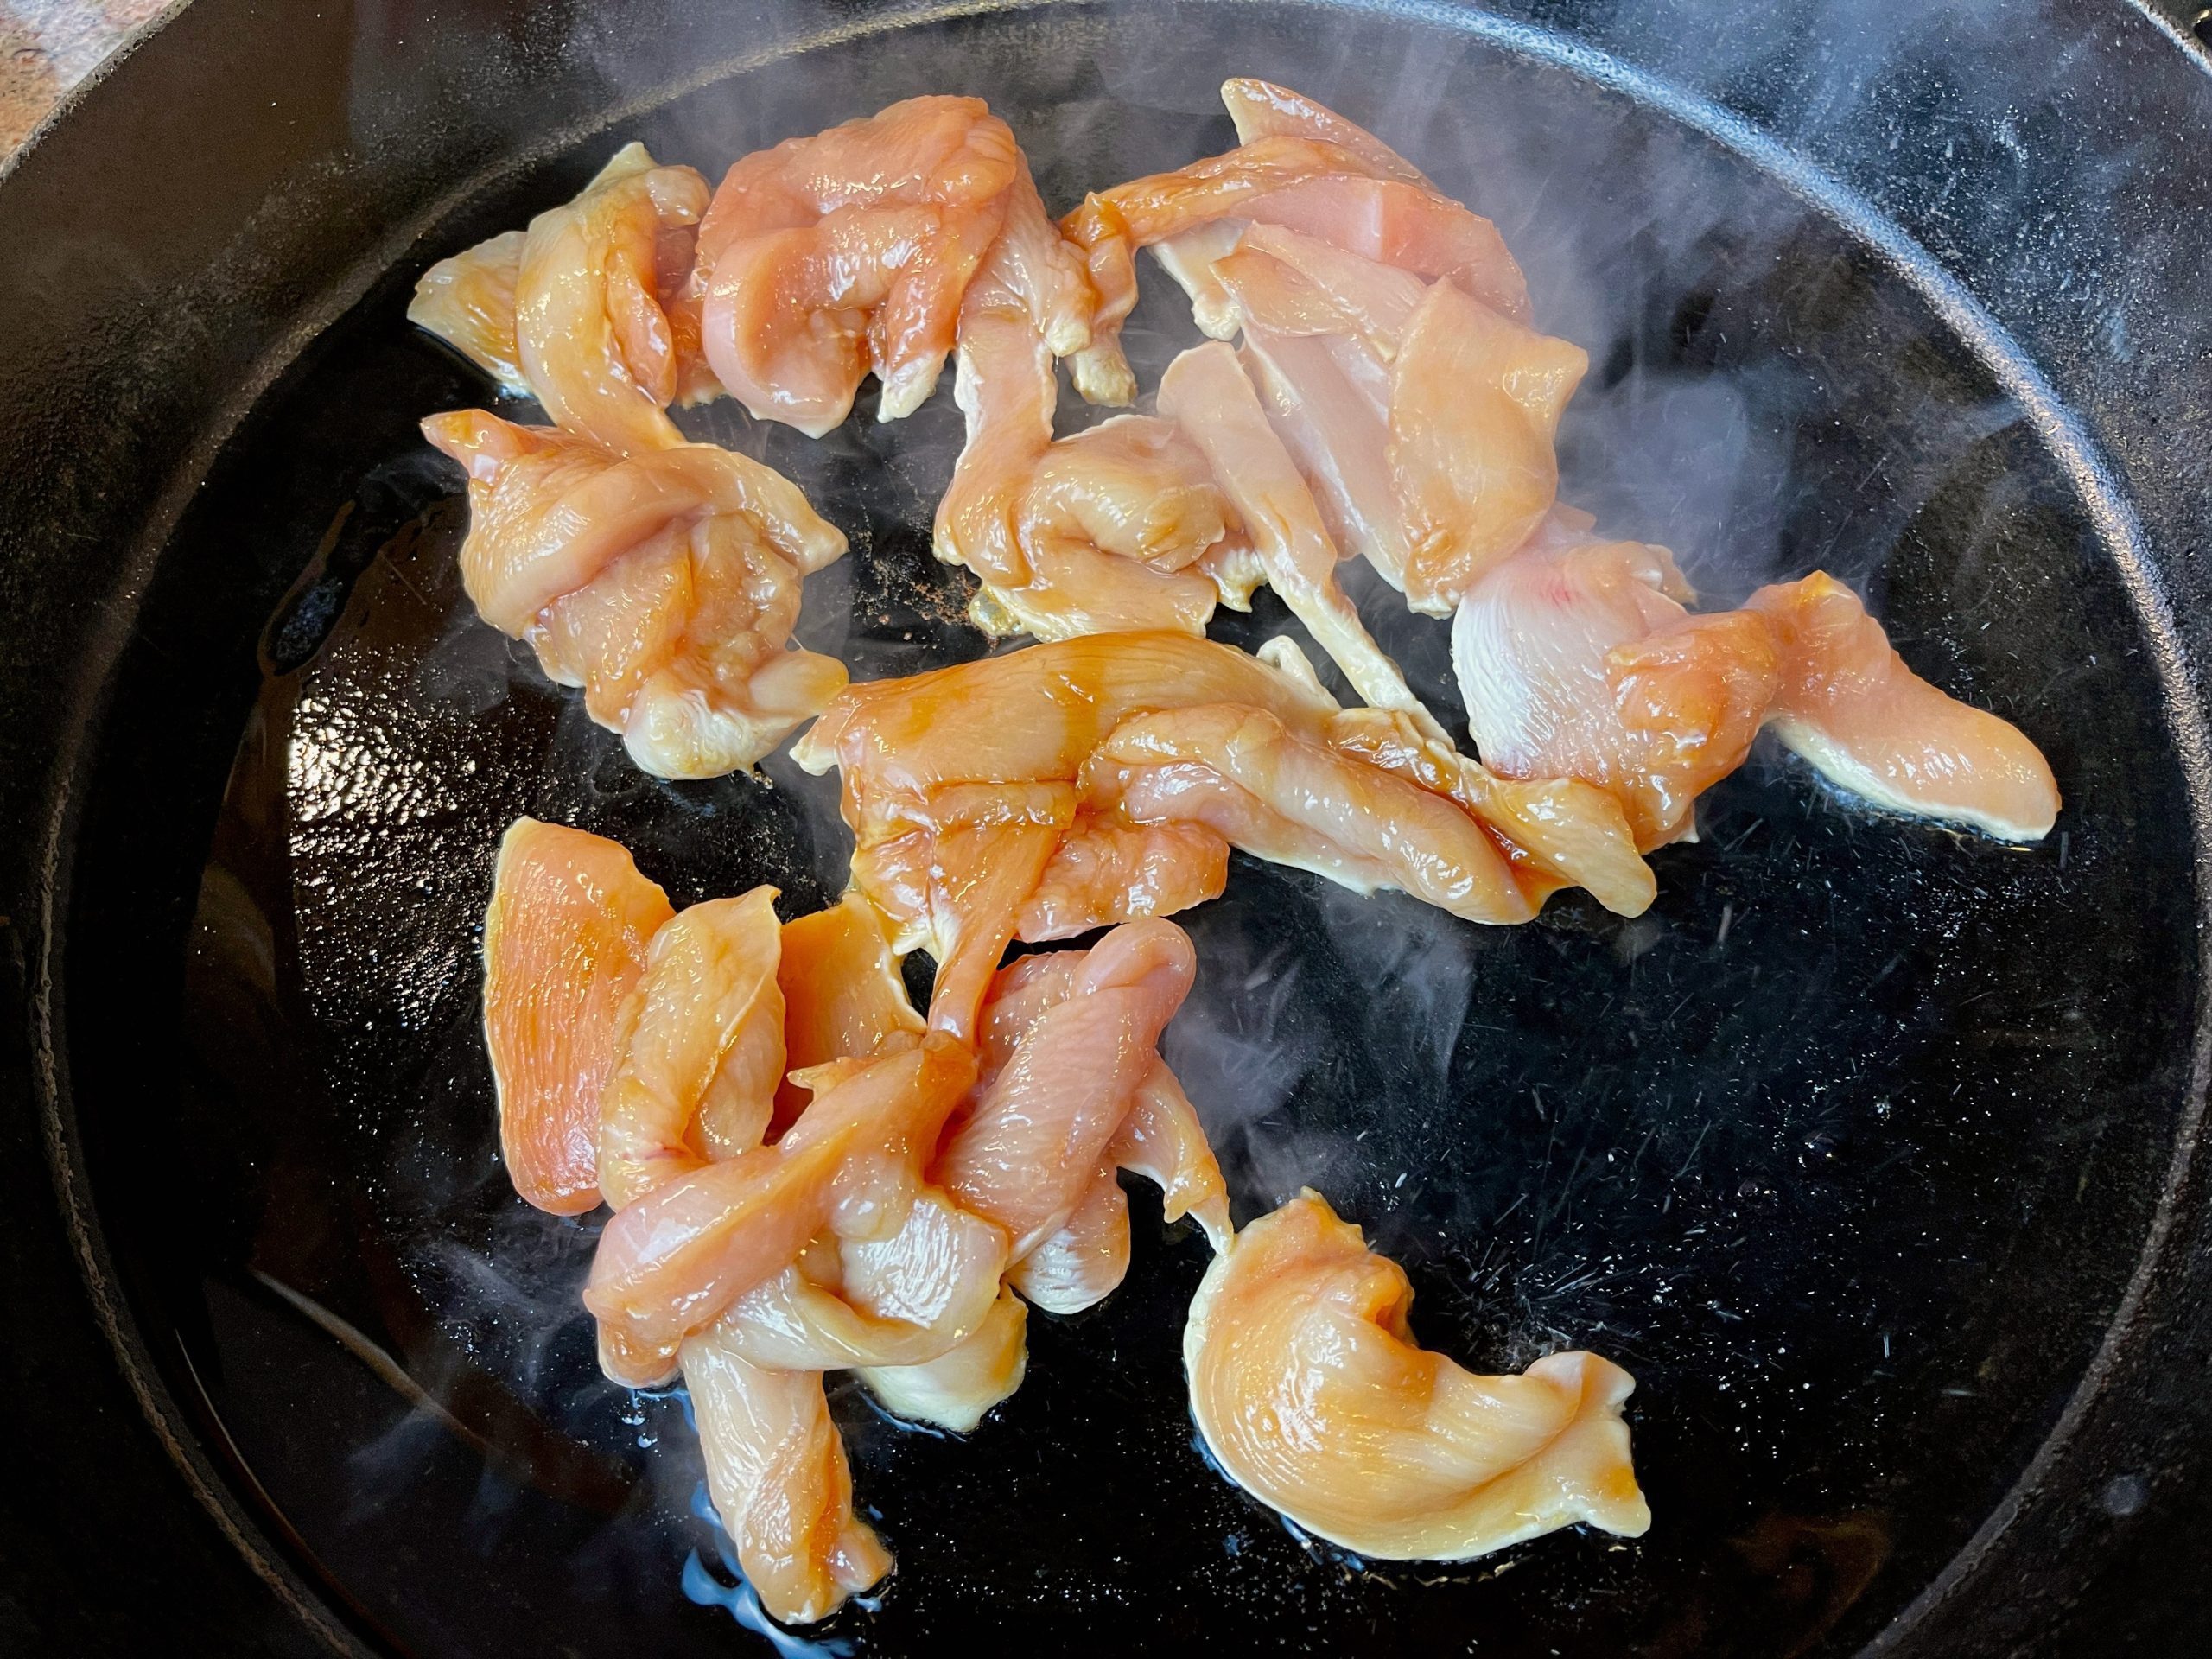 Heat oil in a large pan over high heat.  Add chicken to the pan once the oil is almost smoking. Cook undisturbed for 1 minute to achieve a nice sear (browning.)